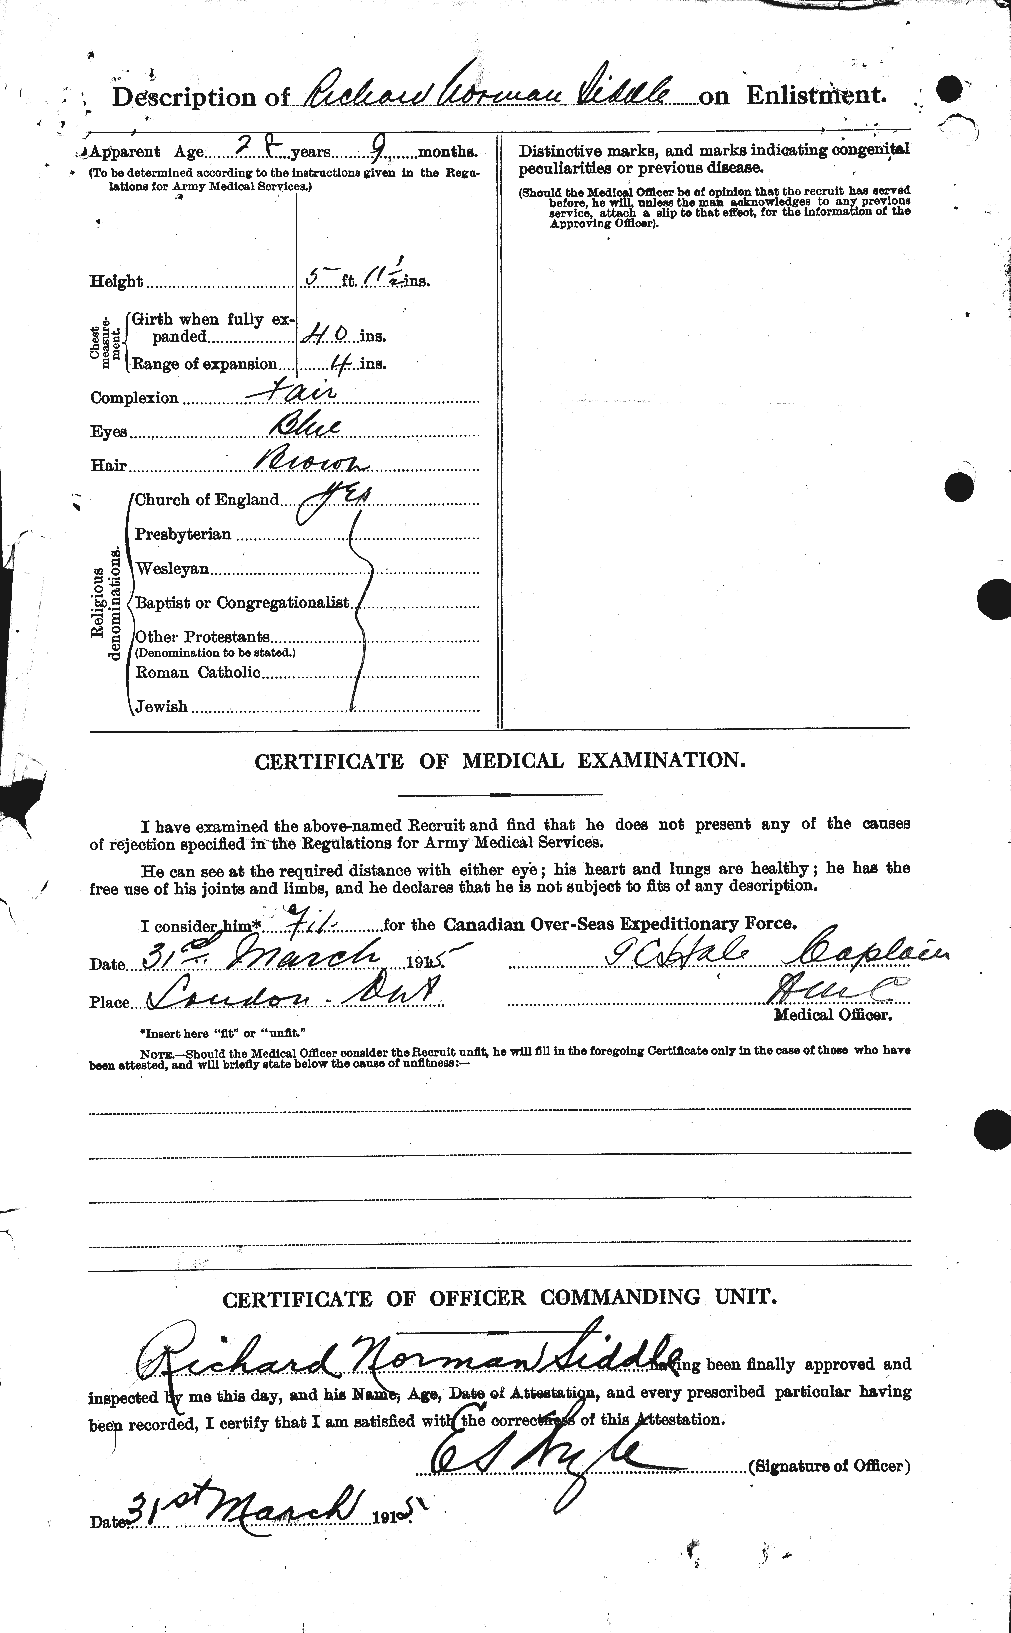 Personnel Records of the First World War - CEF 095967b